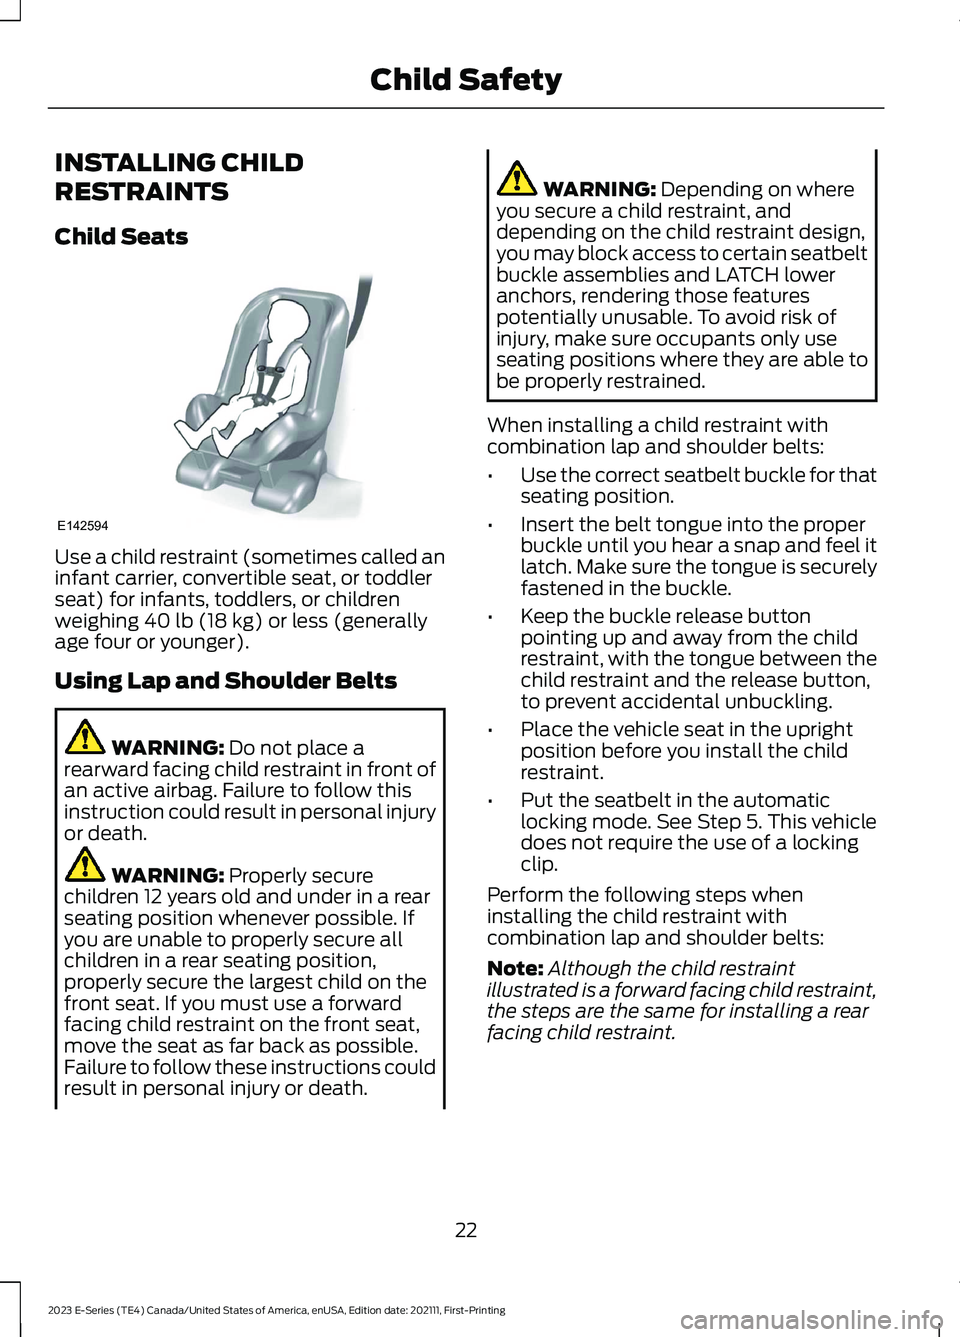 FORD E SERIES 2023  Owners Manual INSTALLING CHILD
RESTRAINTS
Child Seats
Use a child restraint (sometimes called aninfant carrier, convertible seat, or toddlerseat) for infants, toddlers, or childrenweighing 40 lb (18 kg) or less (ge